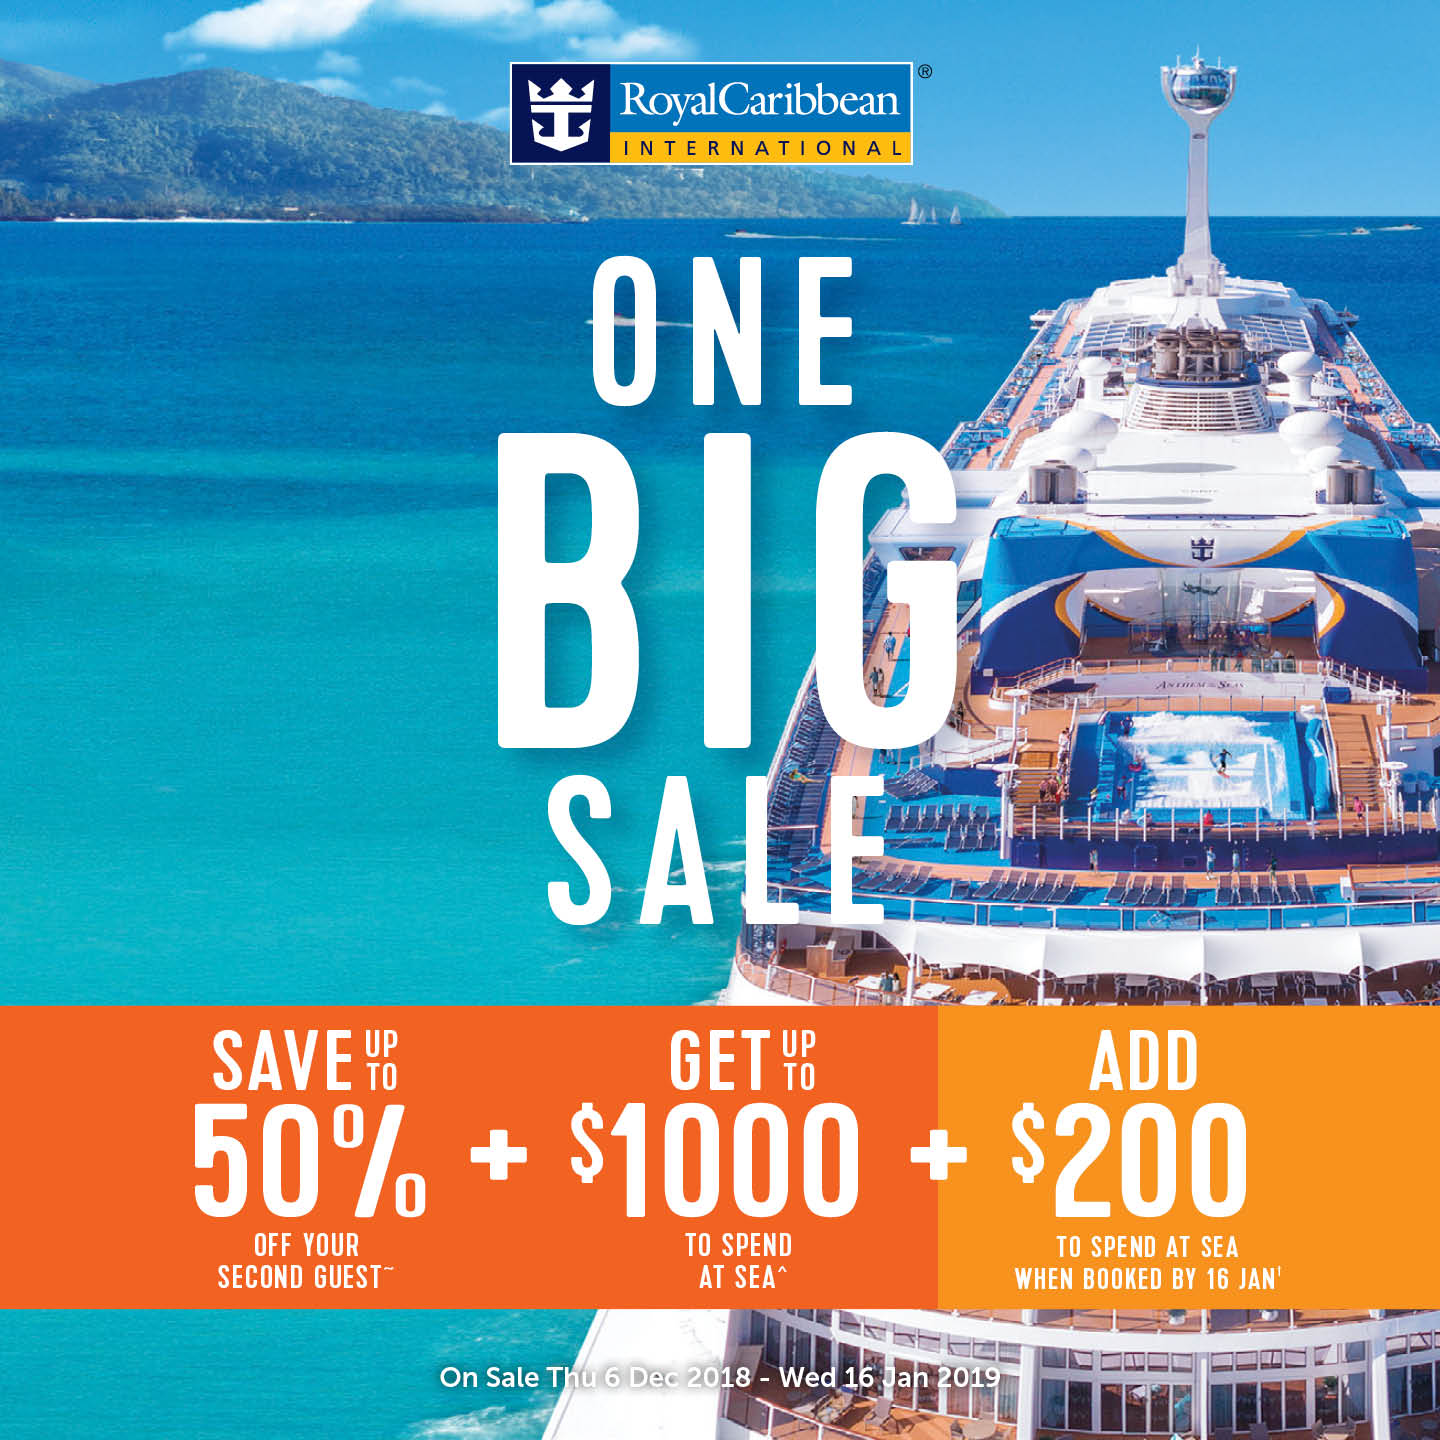 Australia S Best Cruise Deals Cheap Cruises Specials From Sydney Last Minute Offers